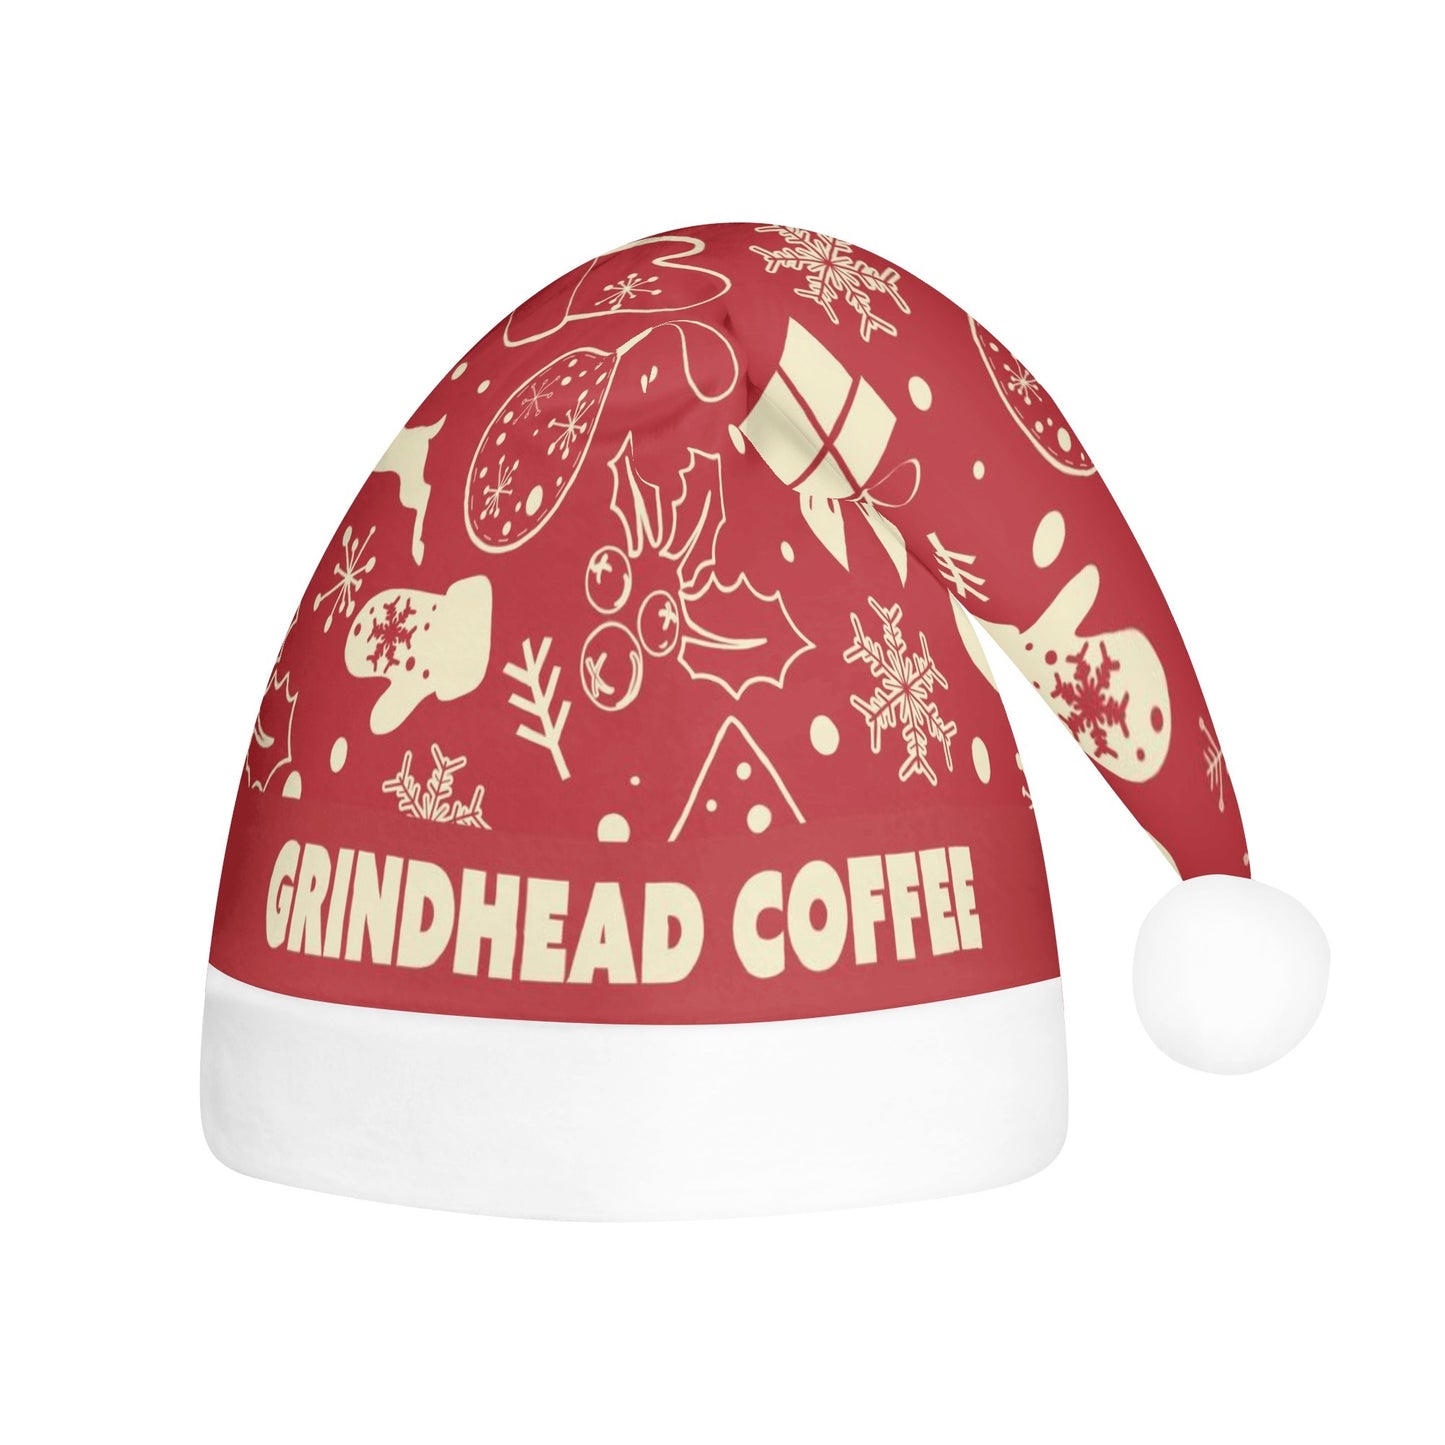 Grindhead Santa Hat - Red and Beige -  Free Shipping!